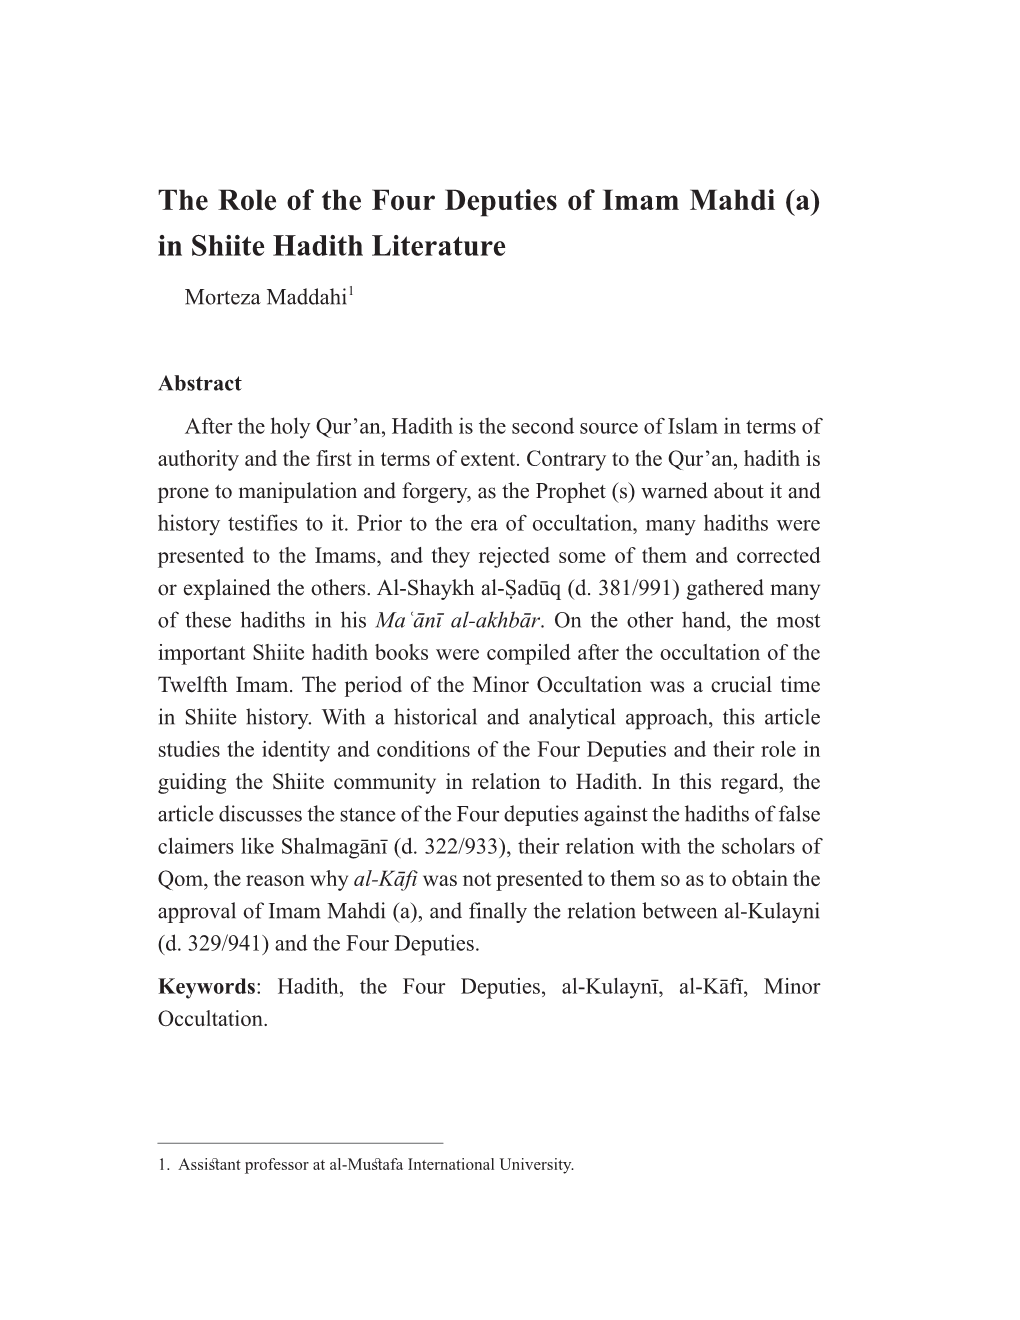 The Role of the Four Deputies of Imam Mahdi (A) in Shiite Hadith Literature